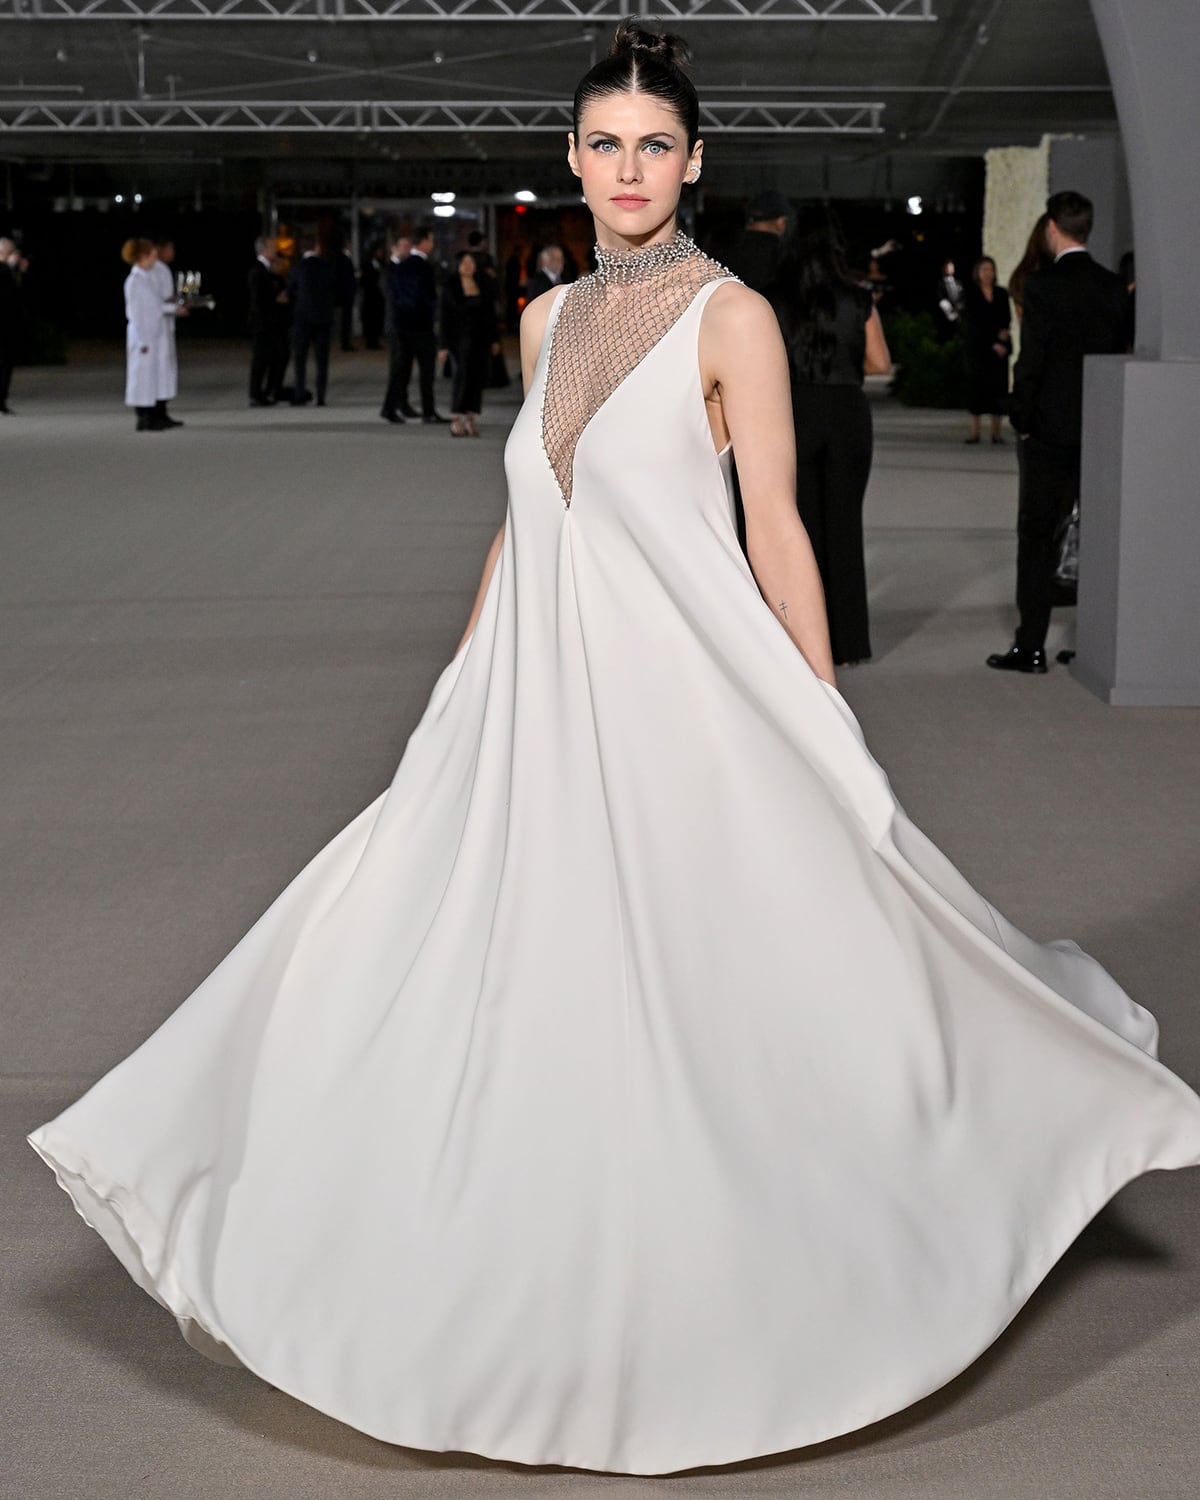 Alexandra Daddario wows in an effortlessly chic white gown with a pearl- and fishnet-embroidered breastplate by Dior